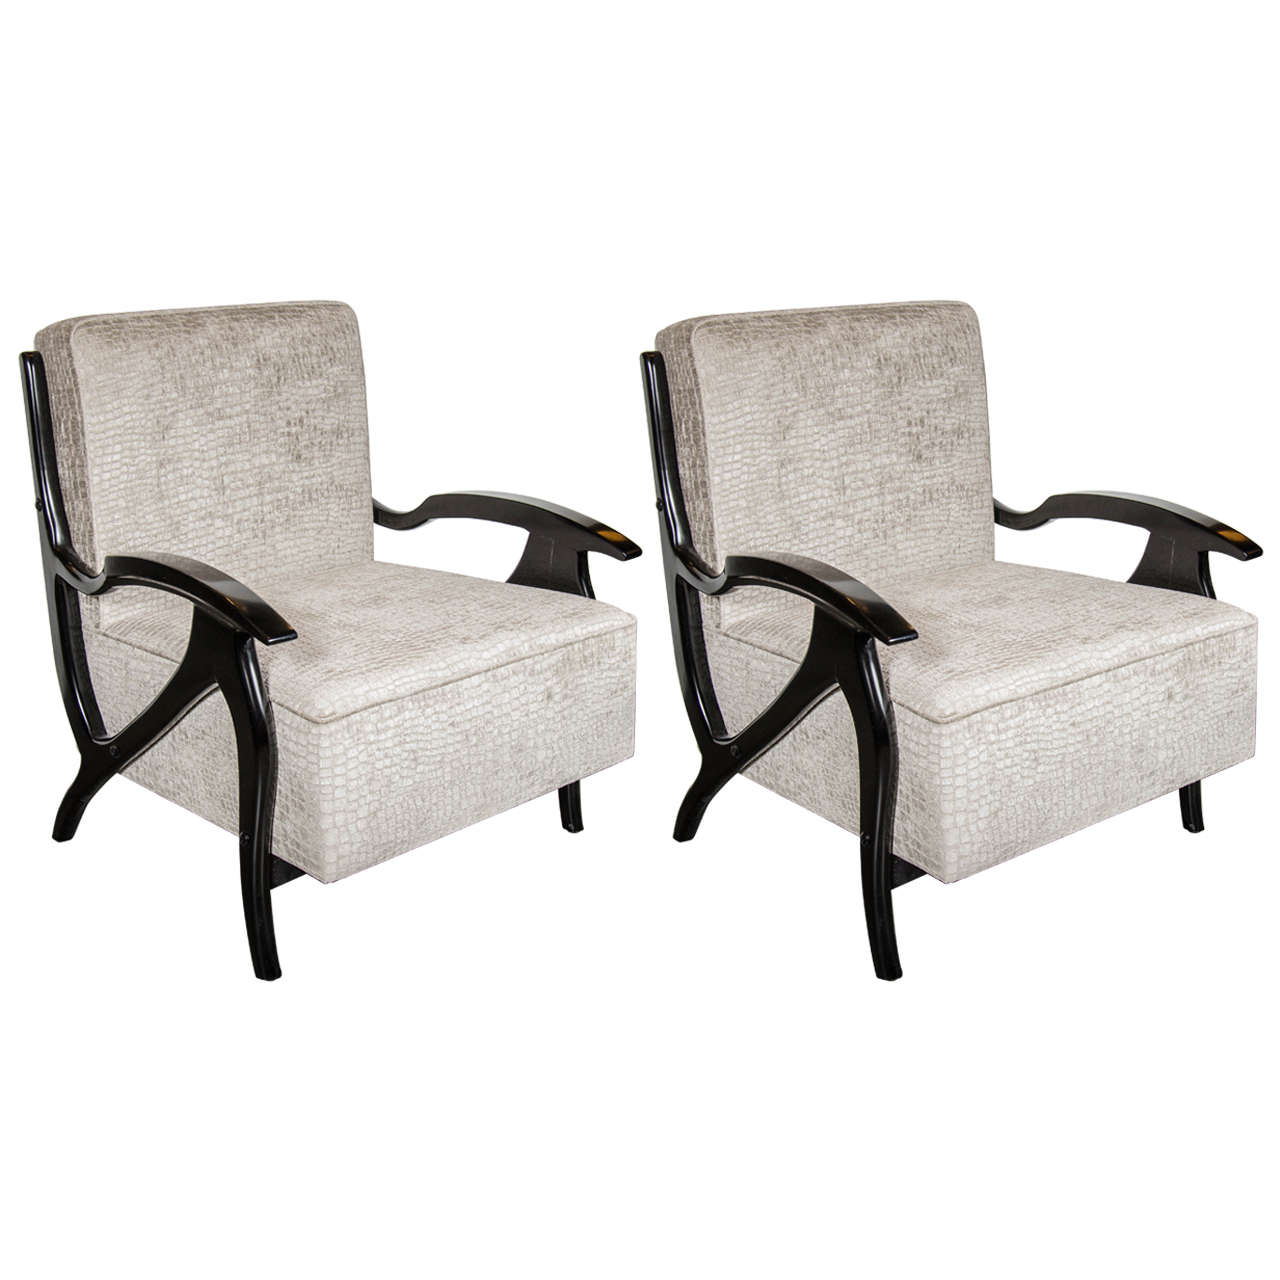 Pair of Mid-Century Modernist Arm or Club Chairs in the Manner of Billy Haines